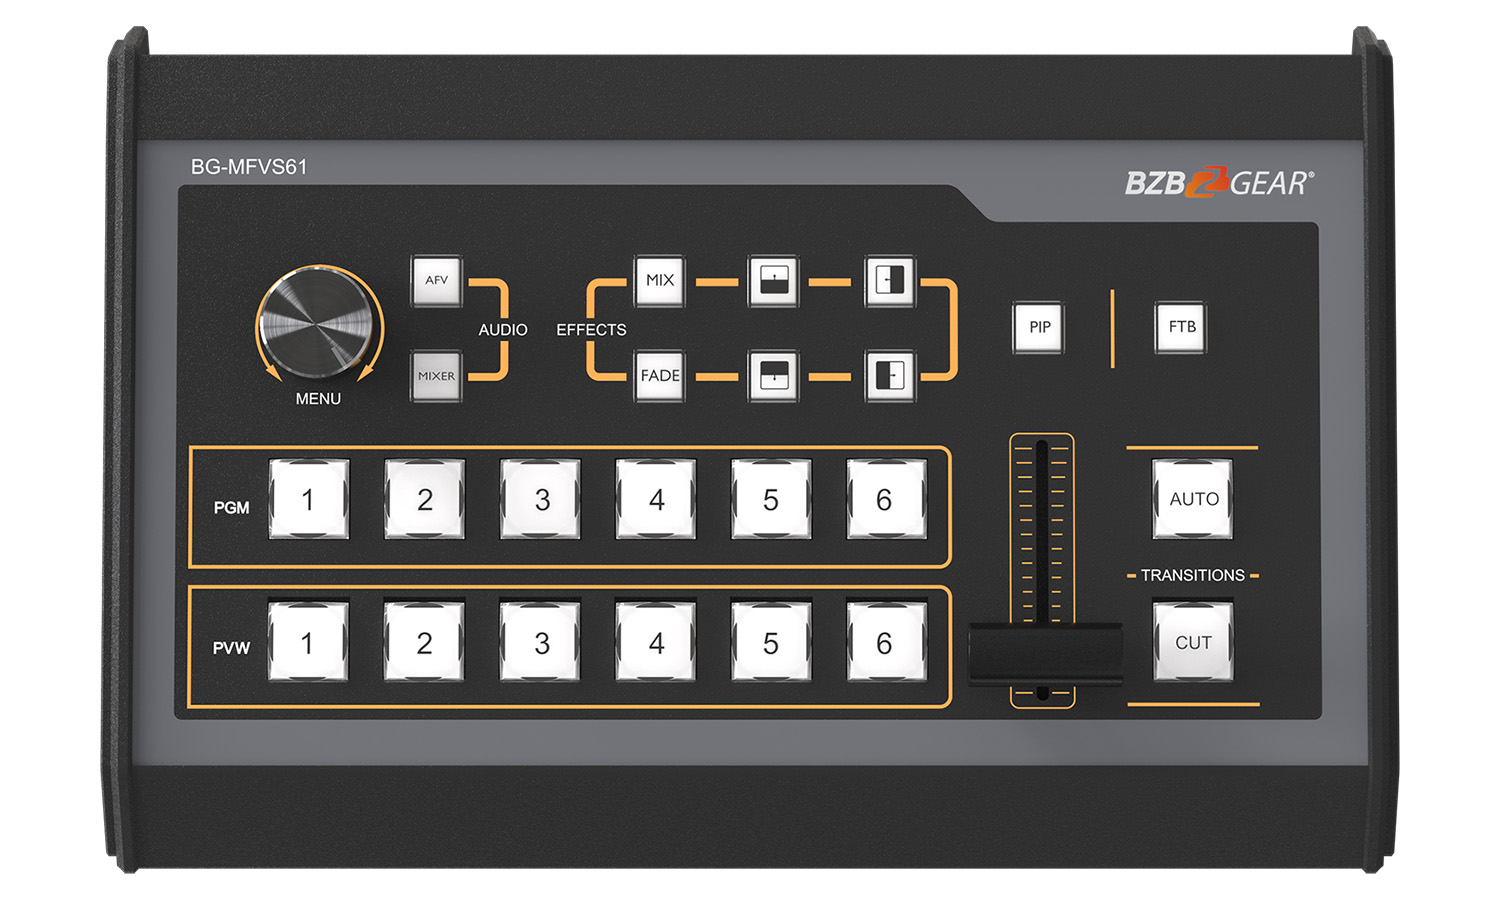 BG-MFVS61-G2 6-input 3G-SDI and HDMI Video Mixer and Production Switcher with Integrated Capture by BZBGEAR